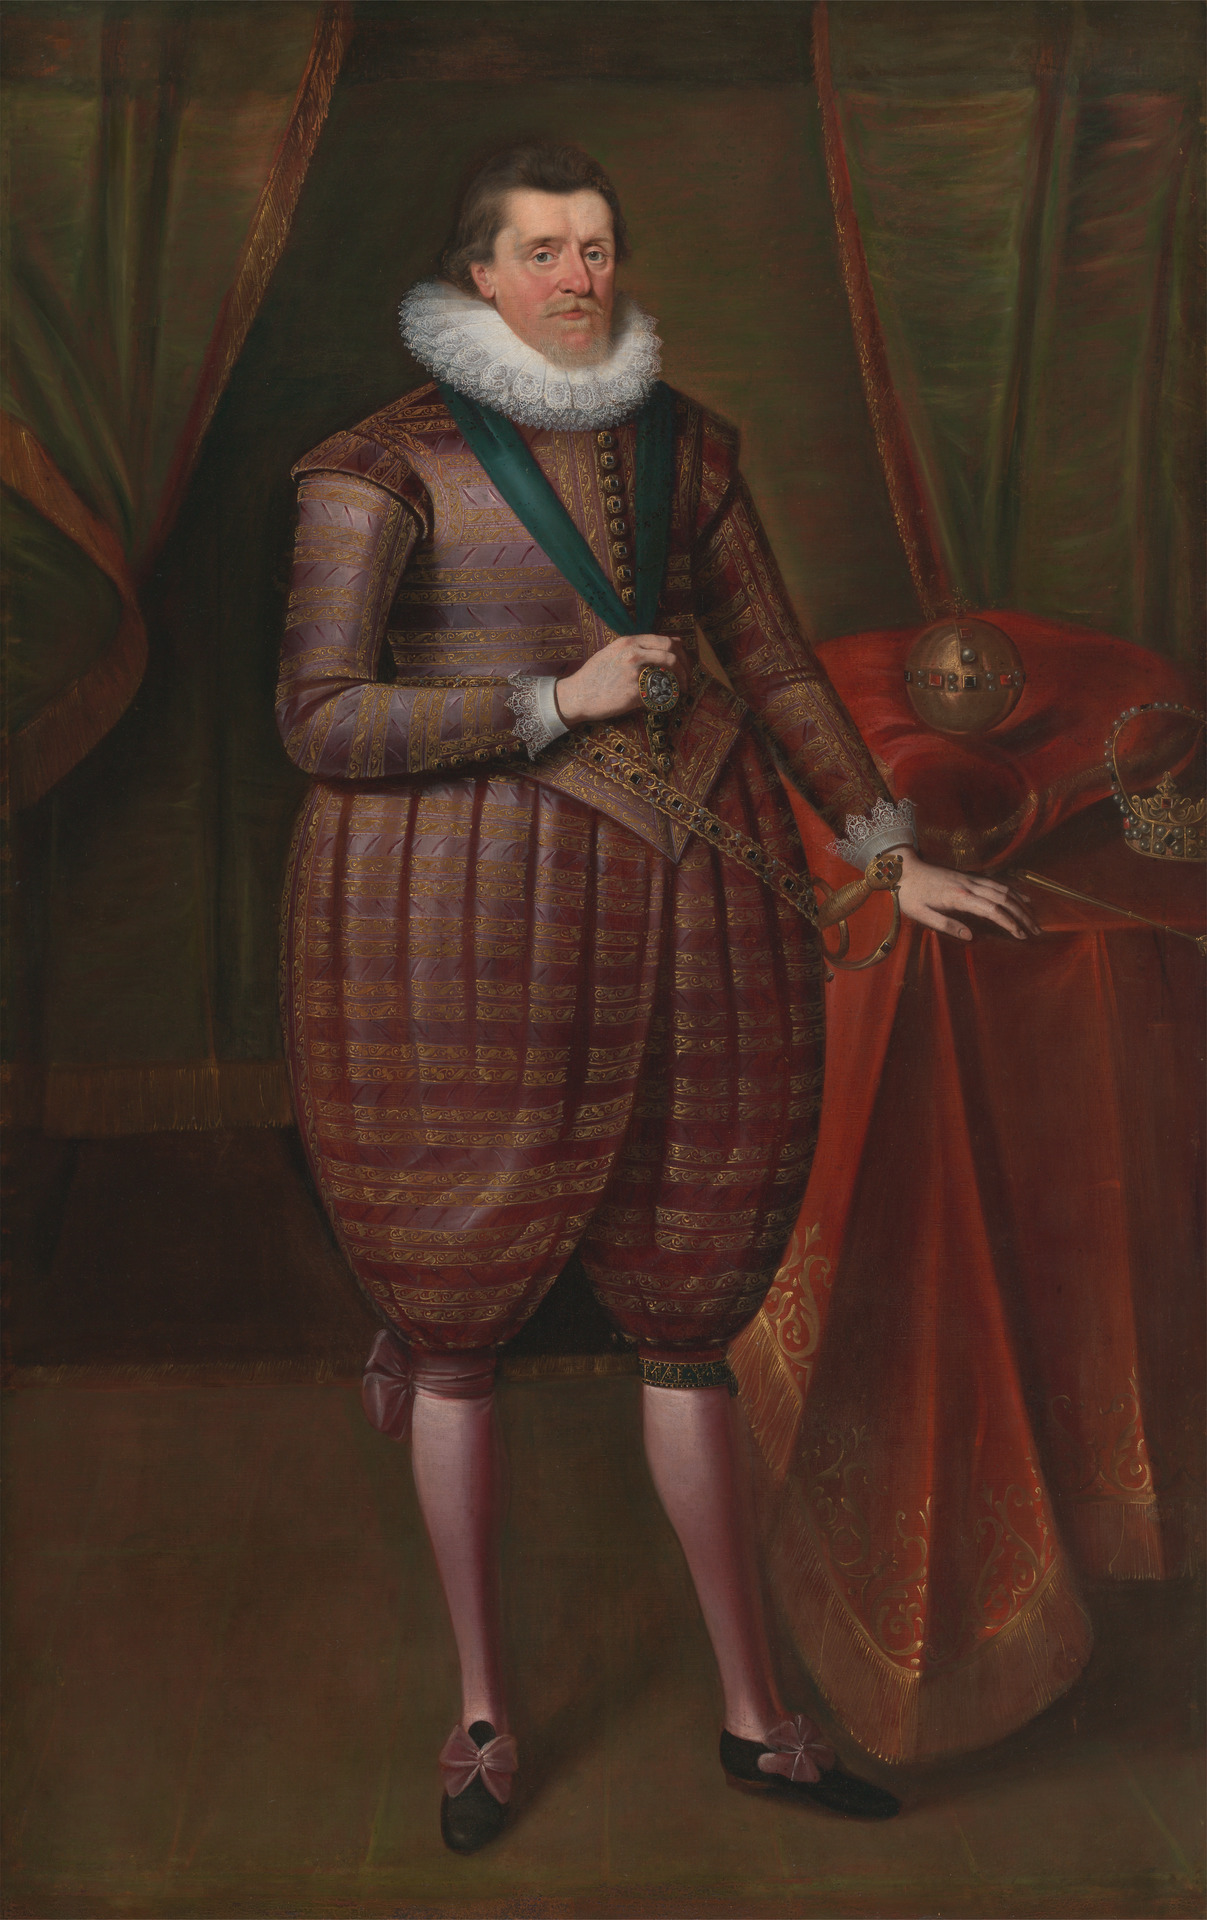 Attributed to Paul van Somer, James VI and I